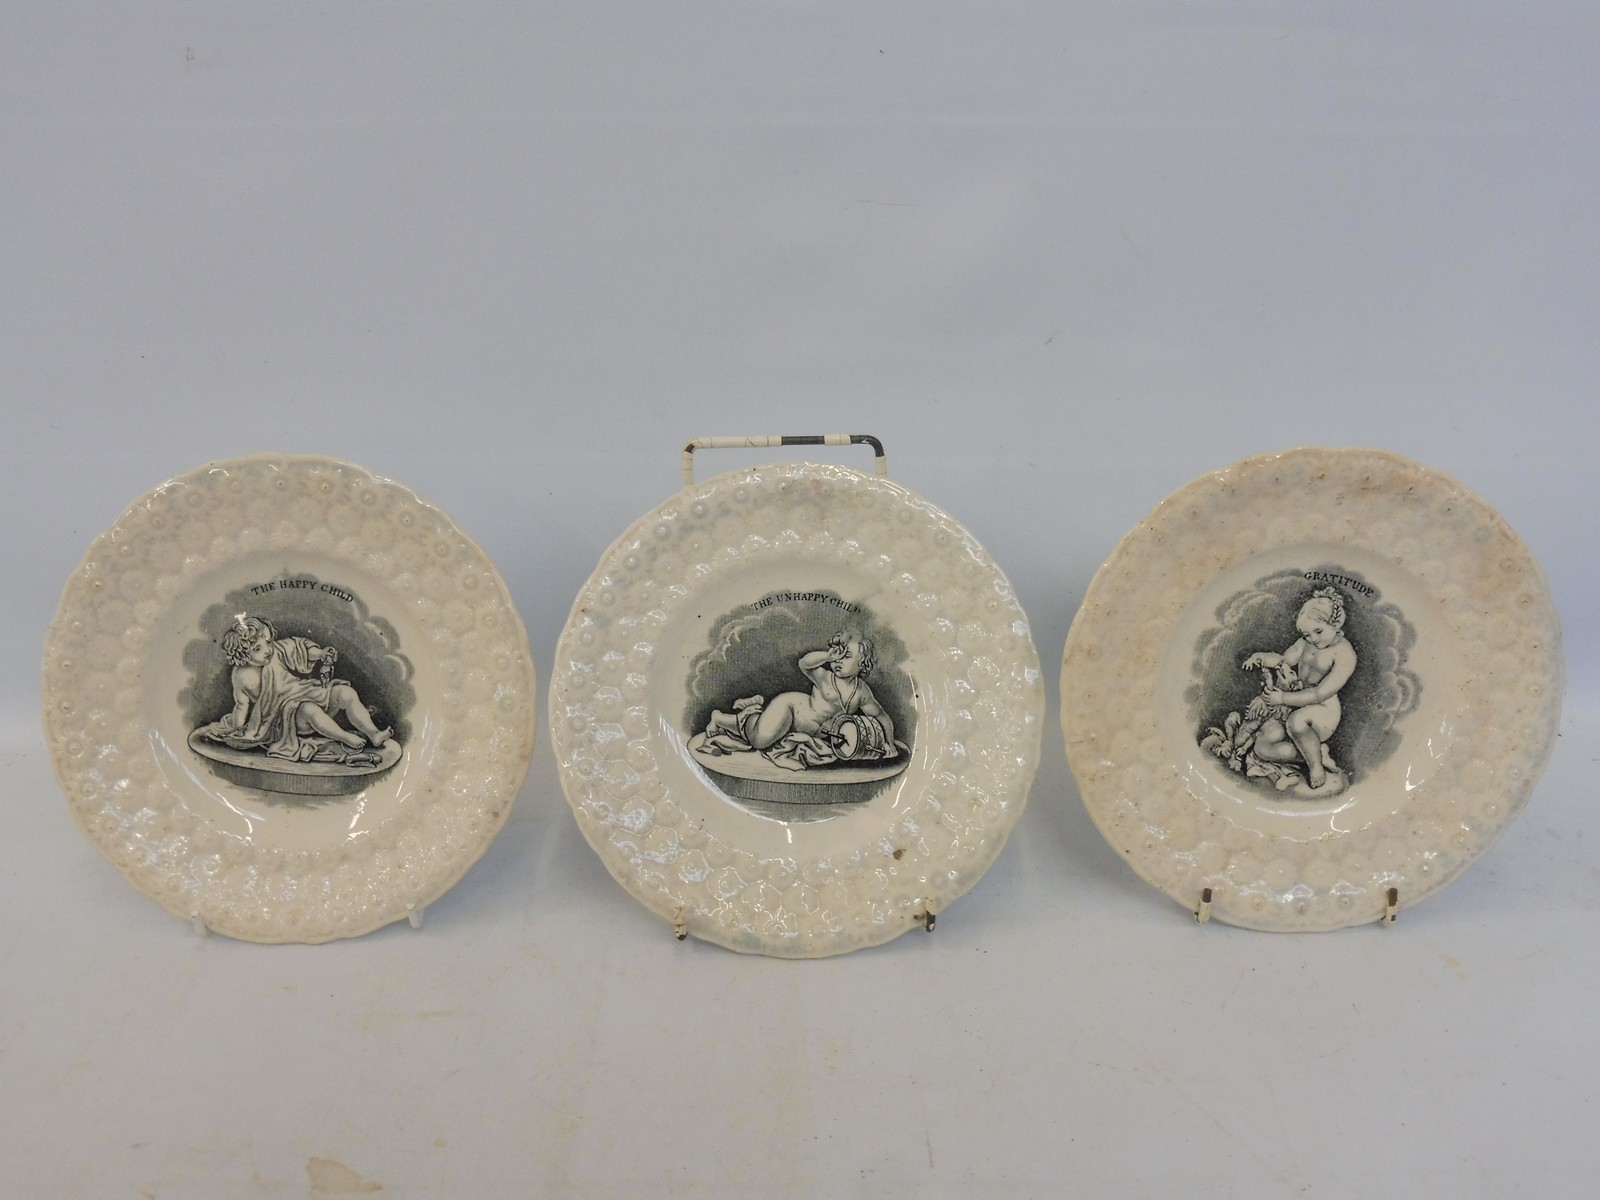 A set of three Victorian child's plates: The Unhappy Child, The Happy Child and Gratitude.